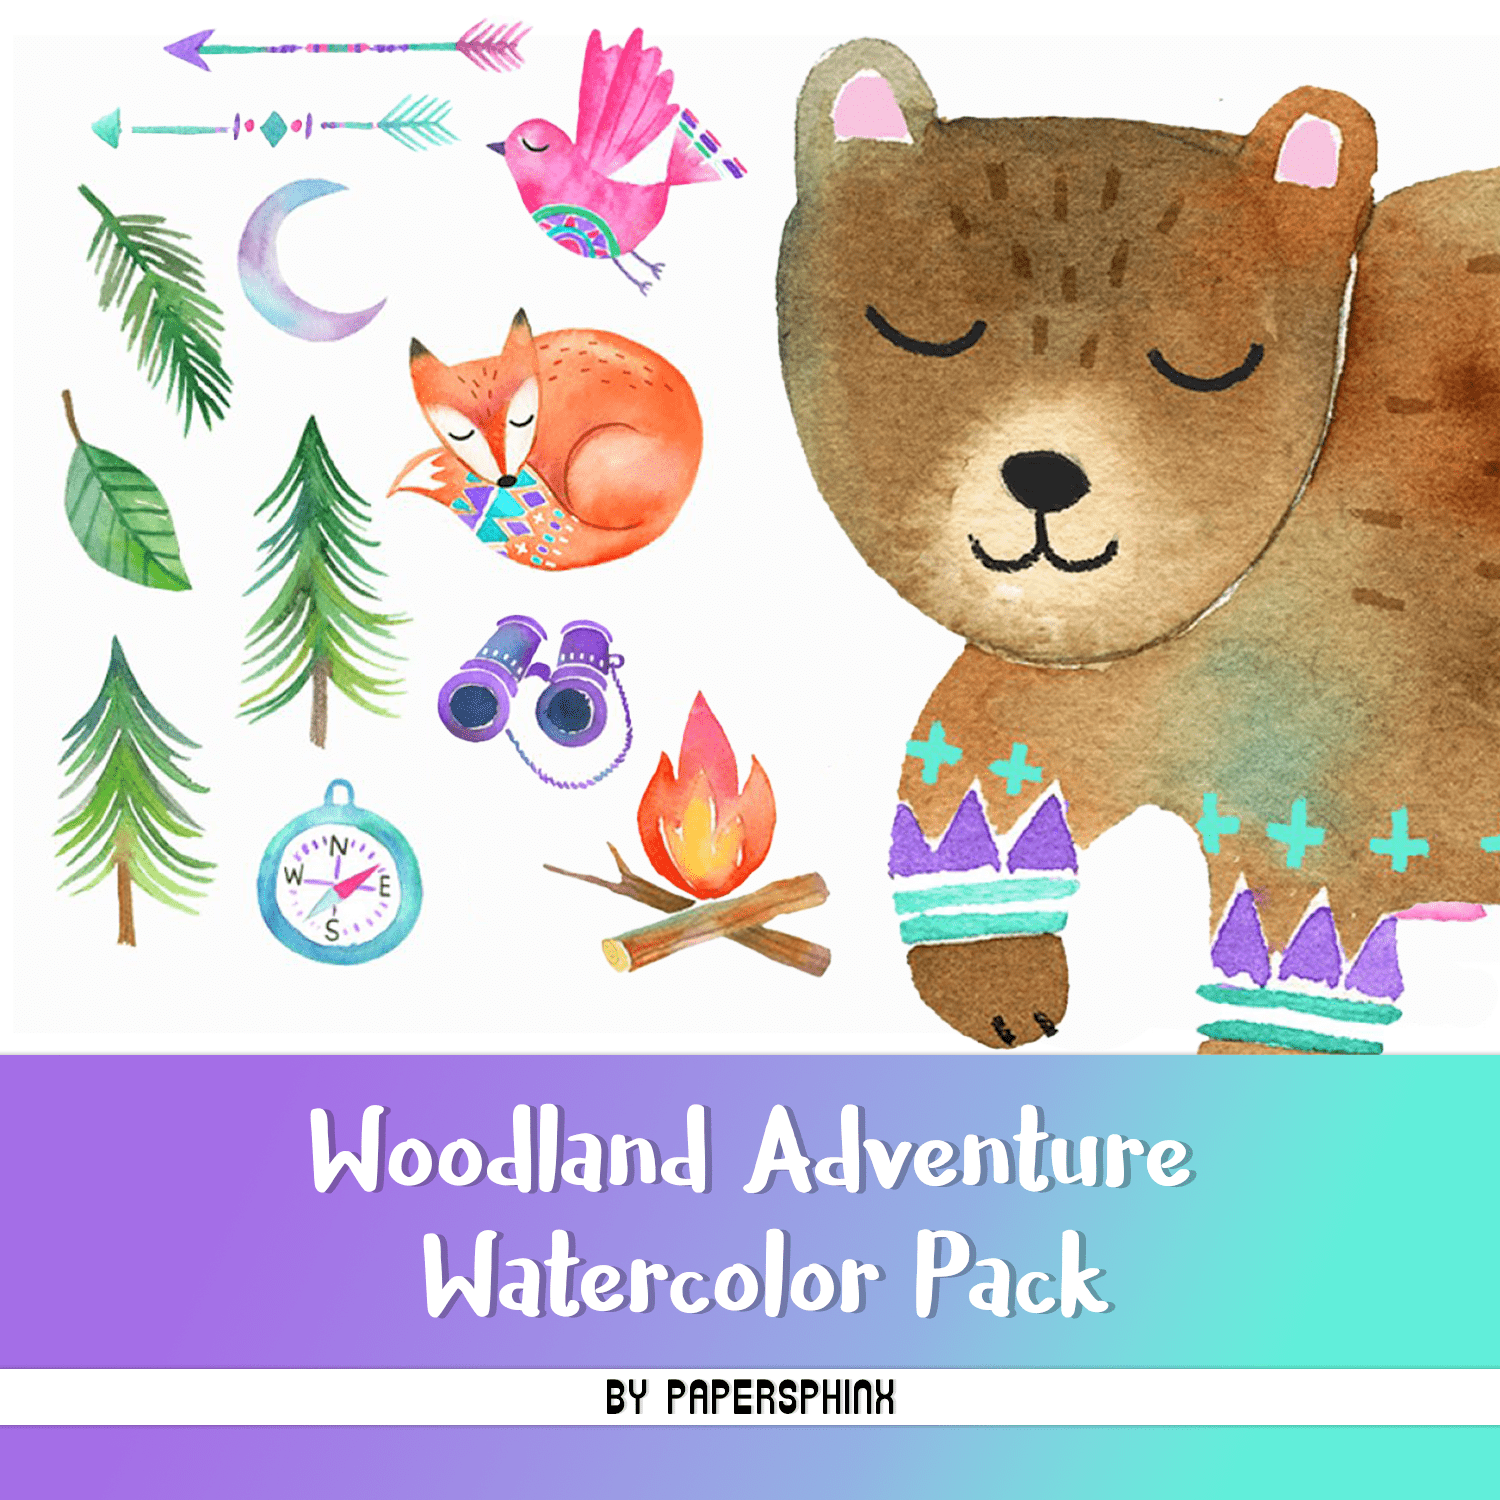 Woodland Adventure Watercolor Pack cover.